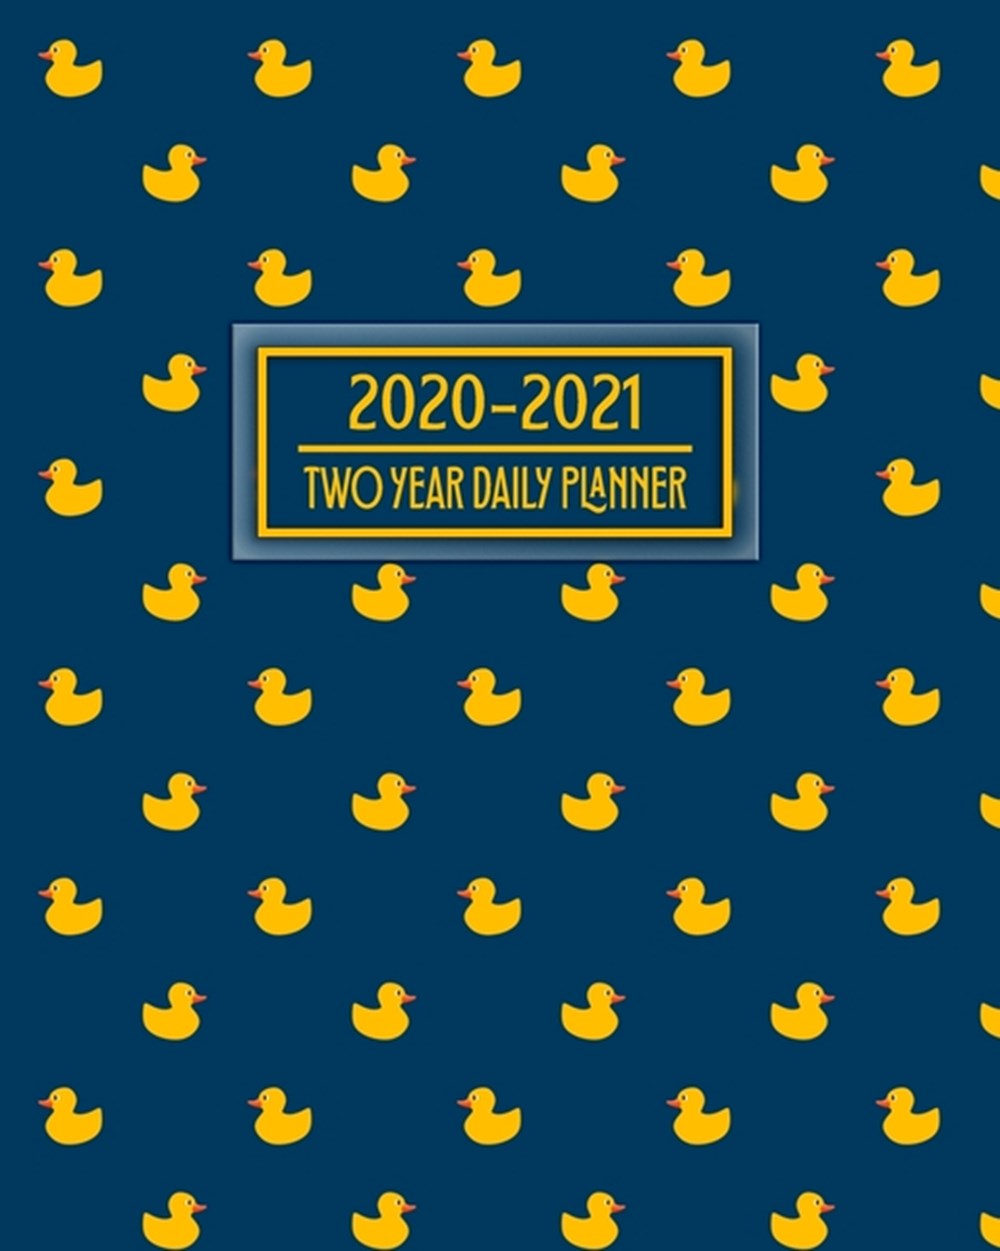 2020-2021 Two Year Daily Planner Super Cute Rubber Ducks Pop Art Daily Weekly Monthly Calendar Organ